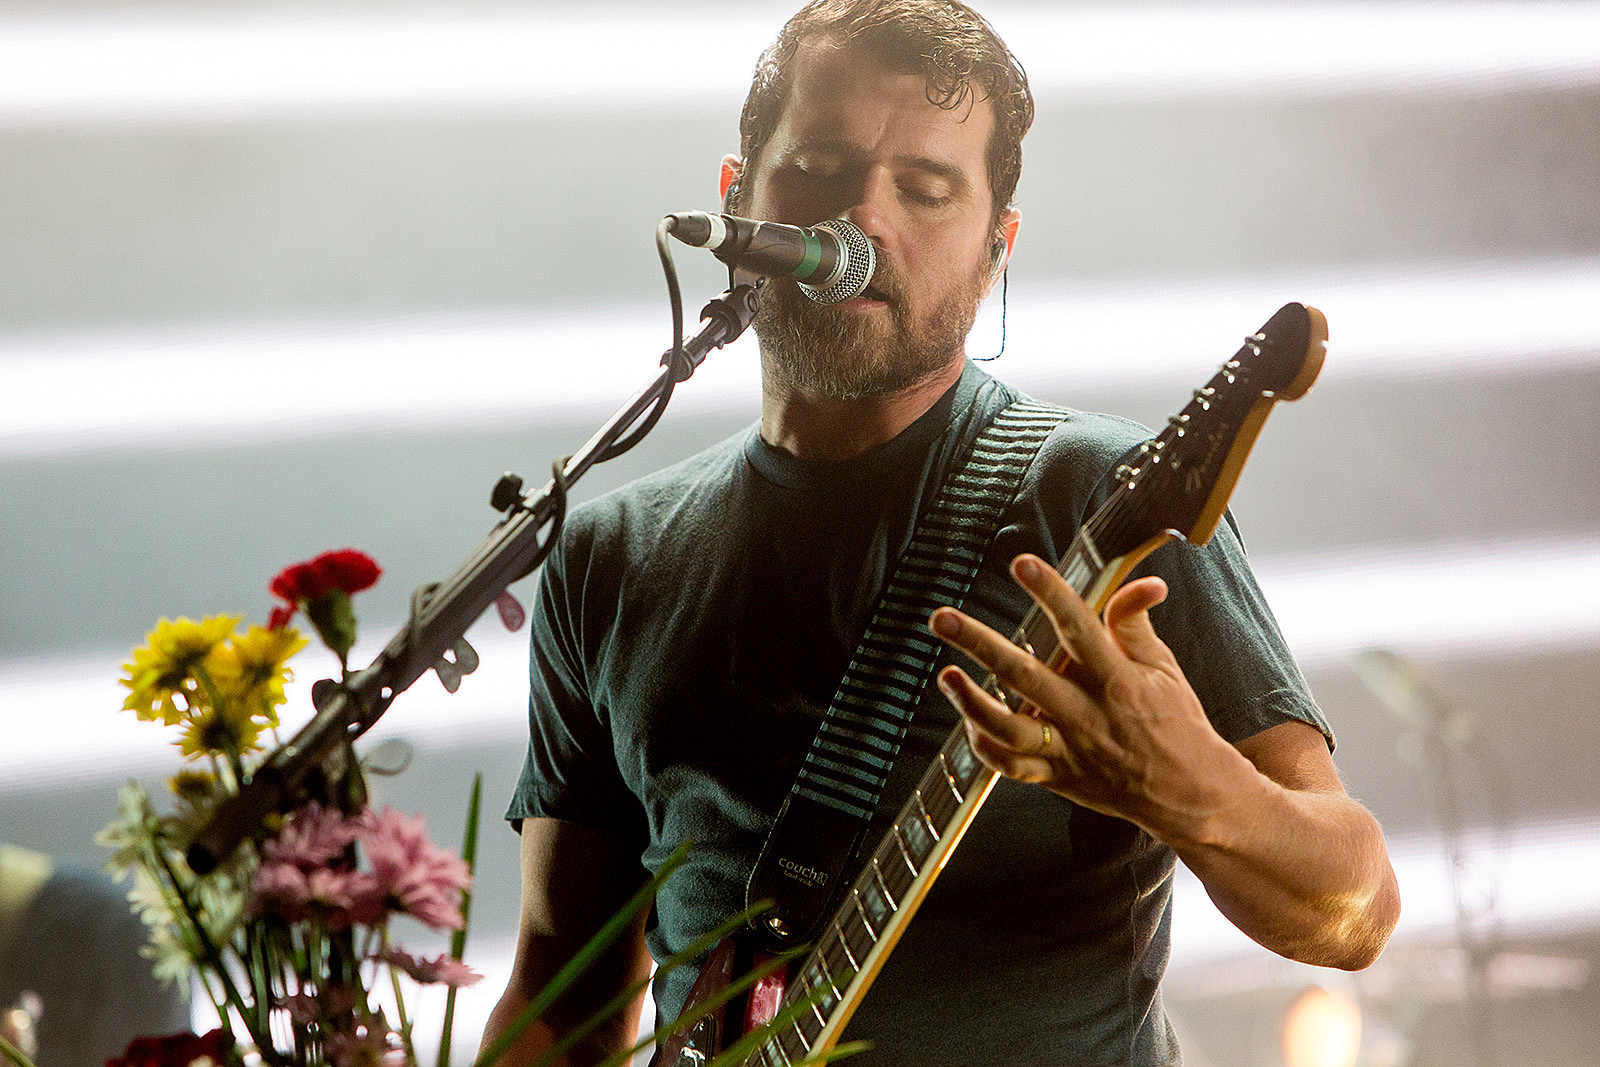 Jesse Lacey appreciation post. I love him and just want the